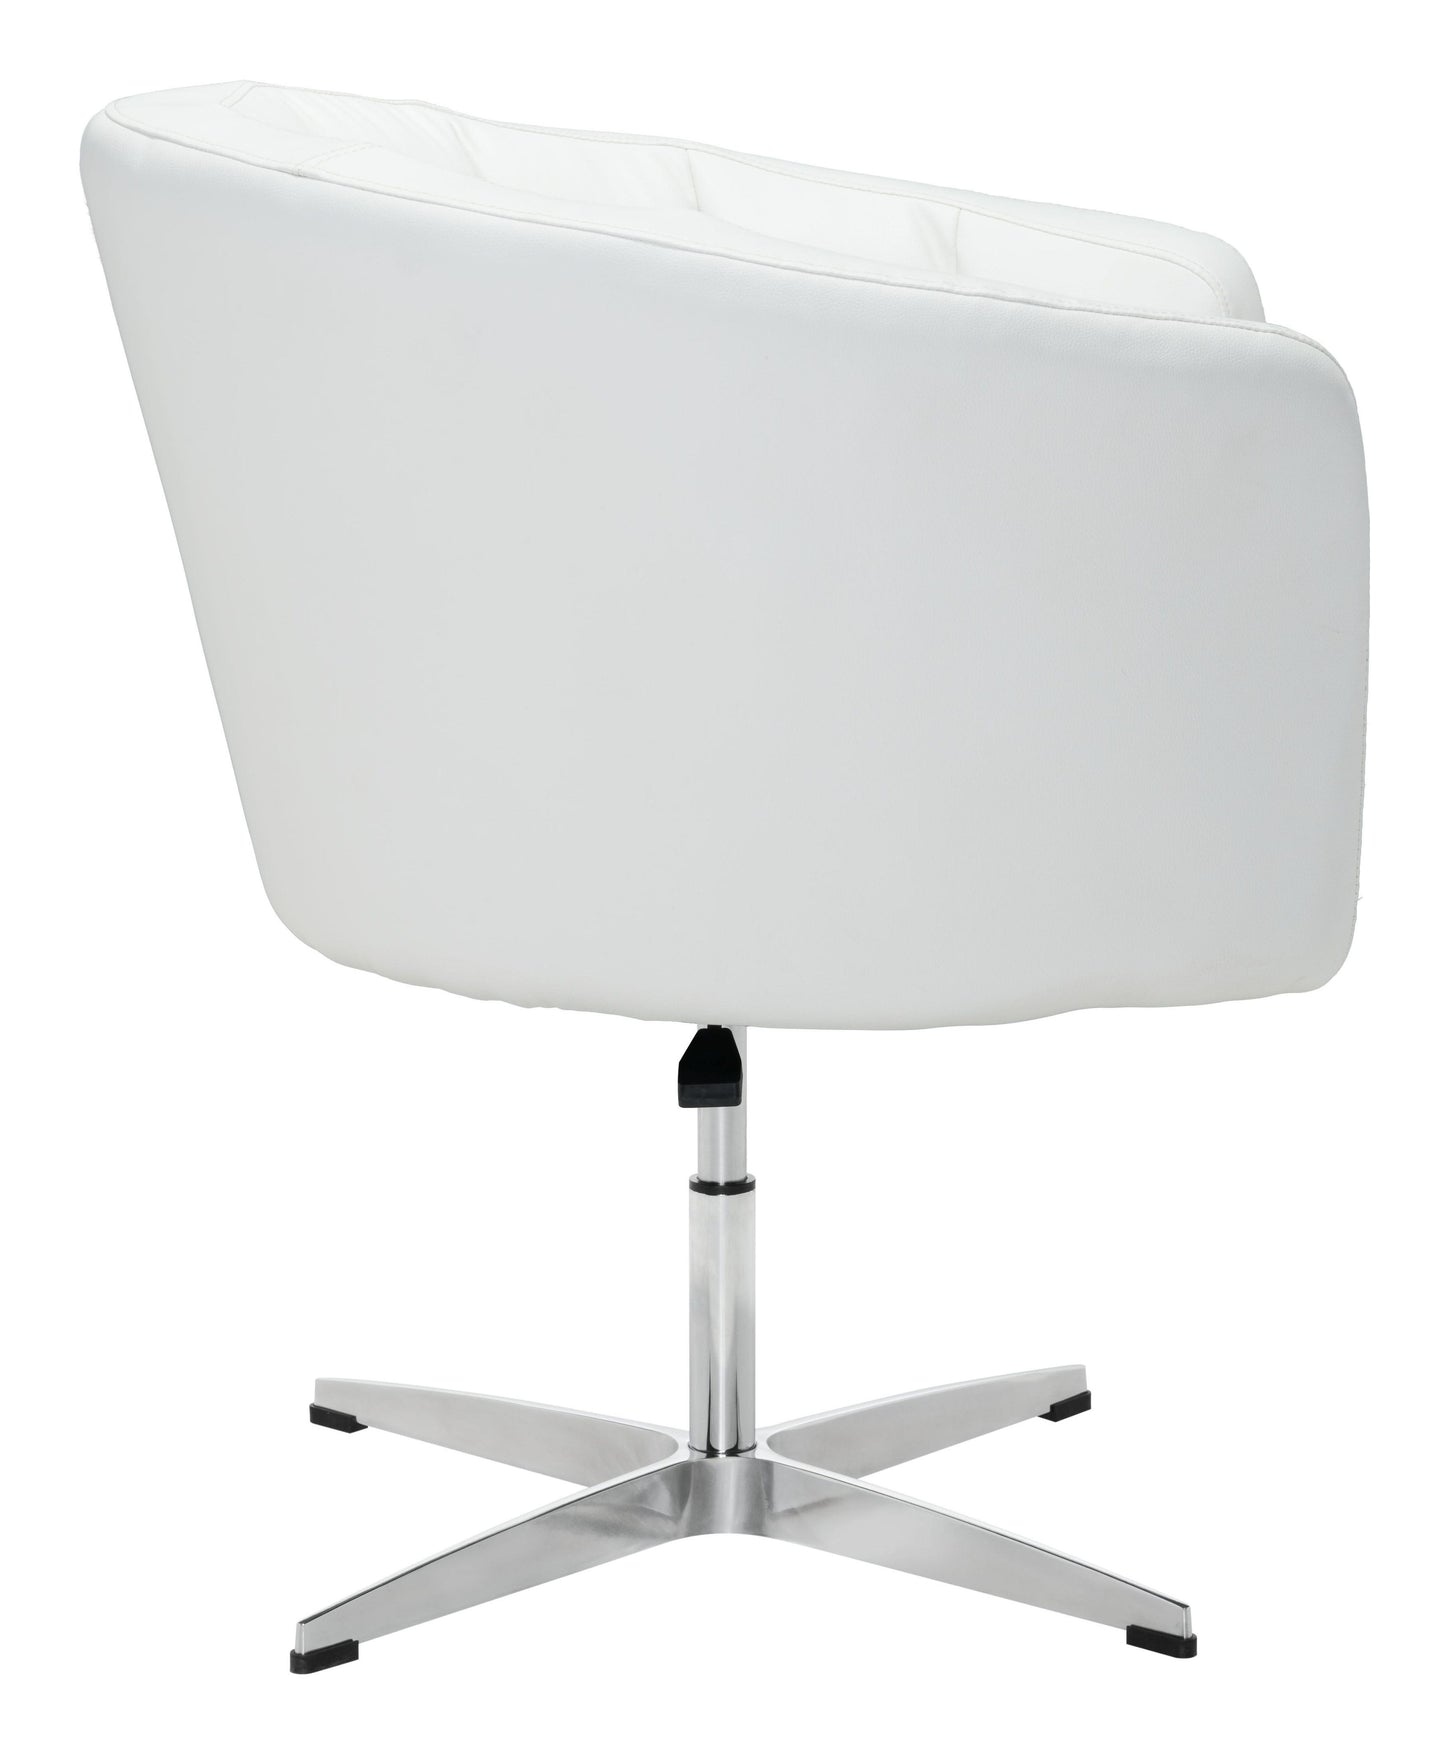 Wilshire Occasional Chair White